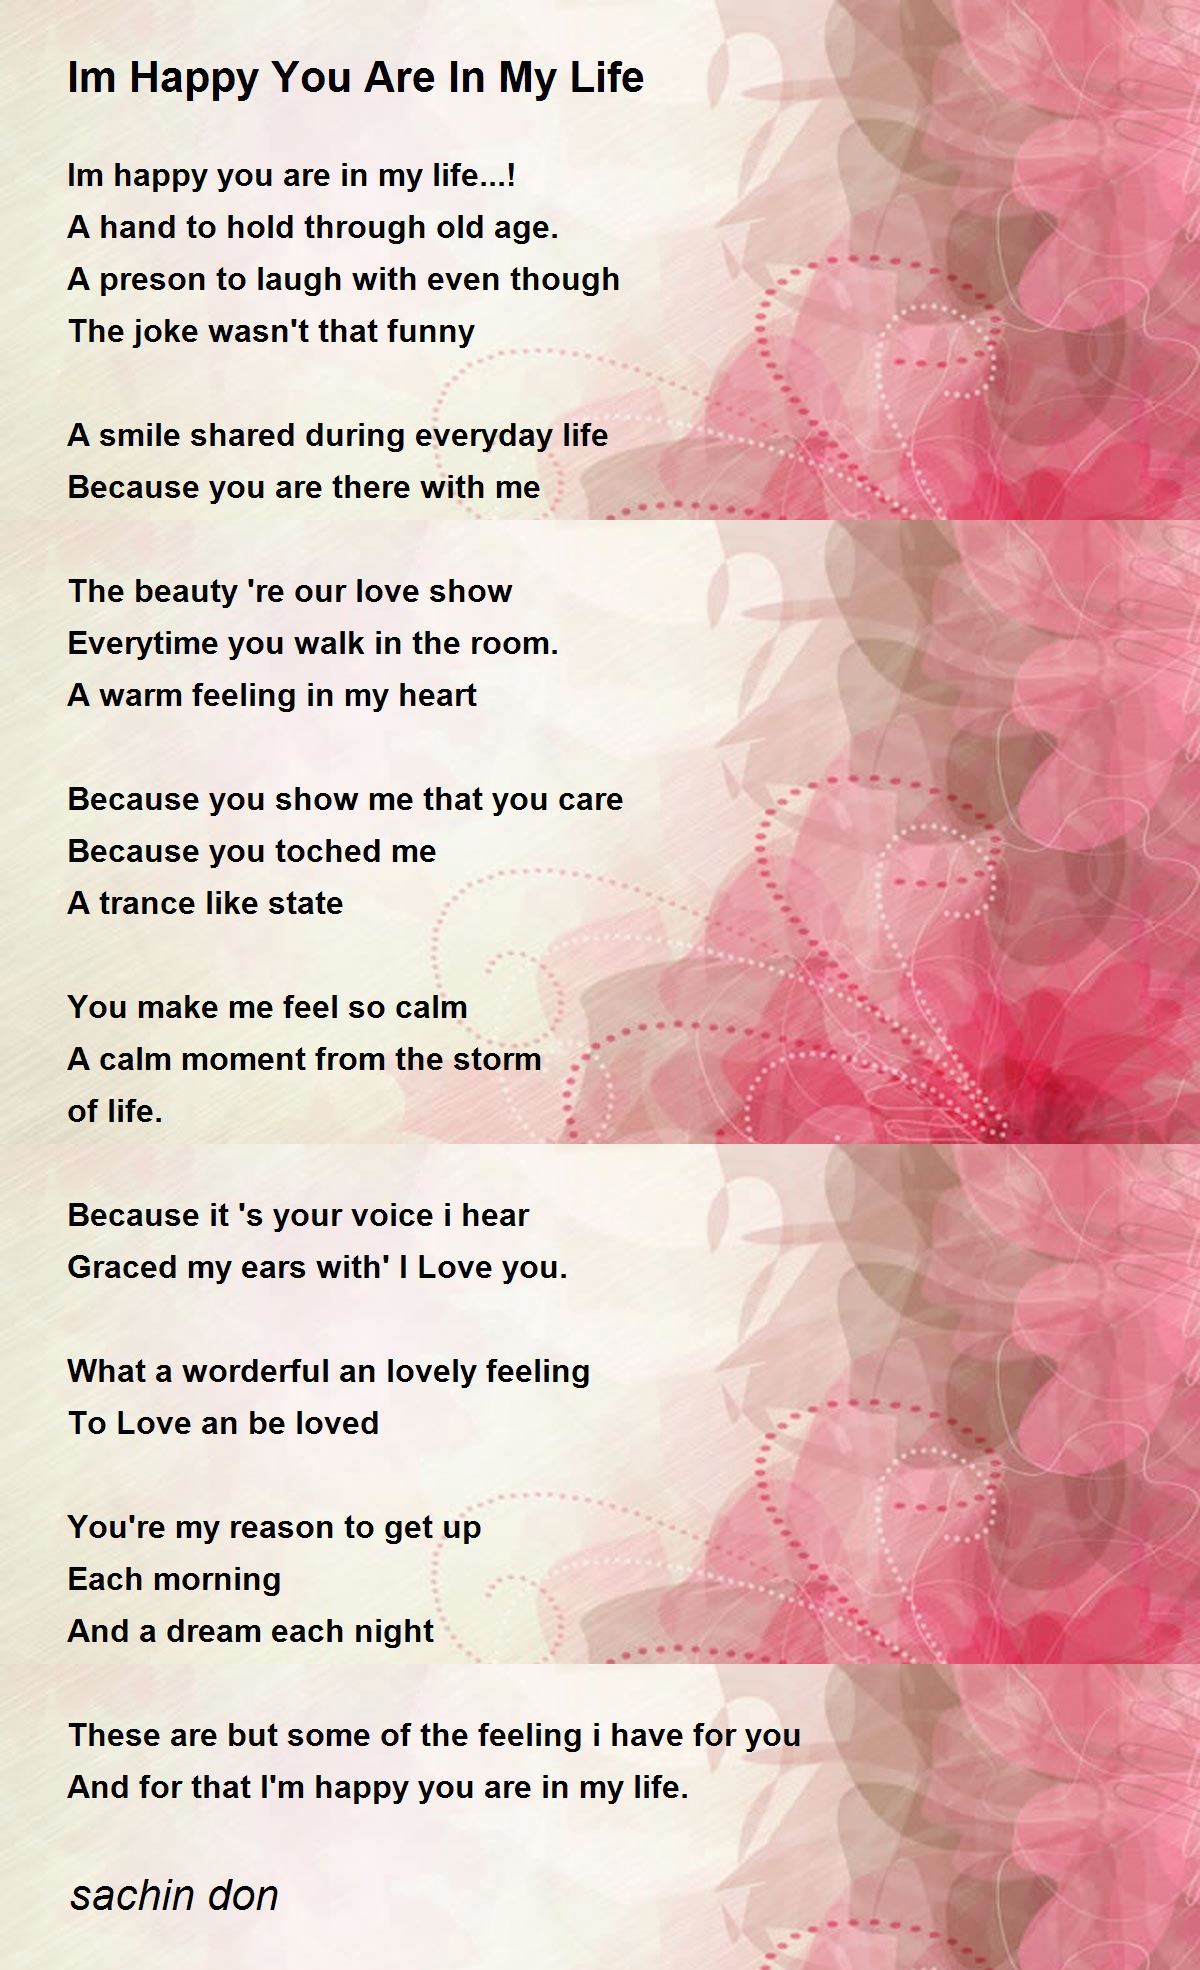 Im Happy You Are In My Life Poem By Sachin Don Poem Hunter